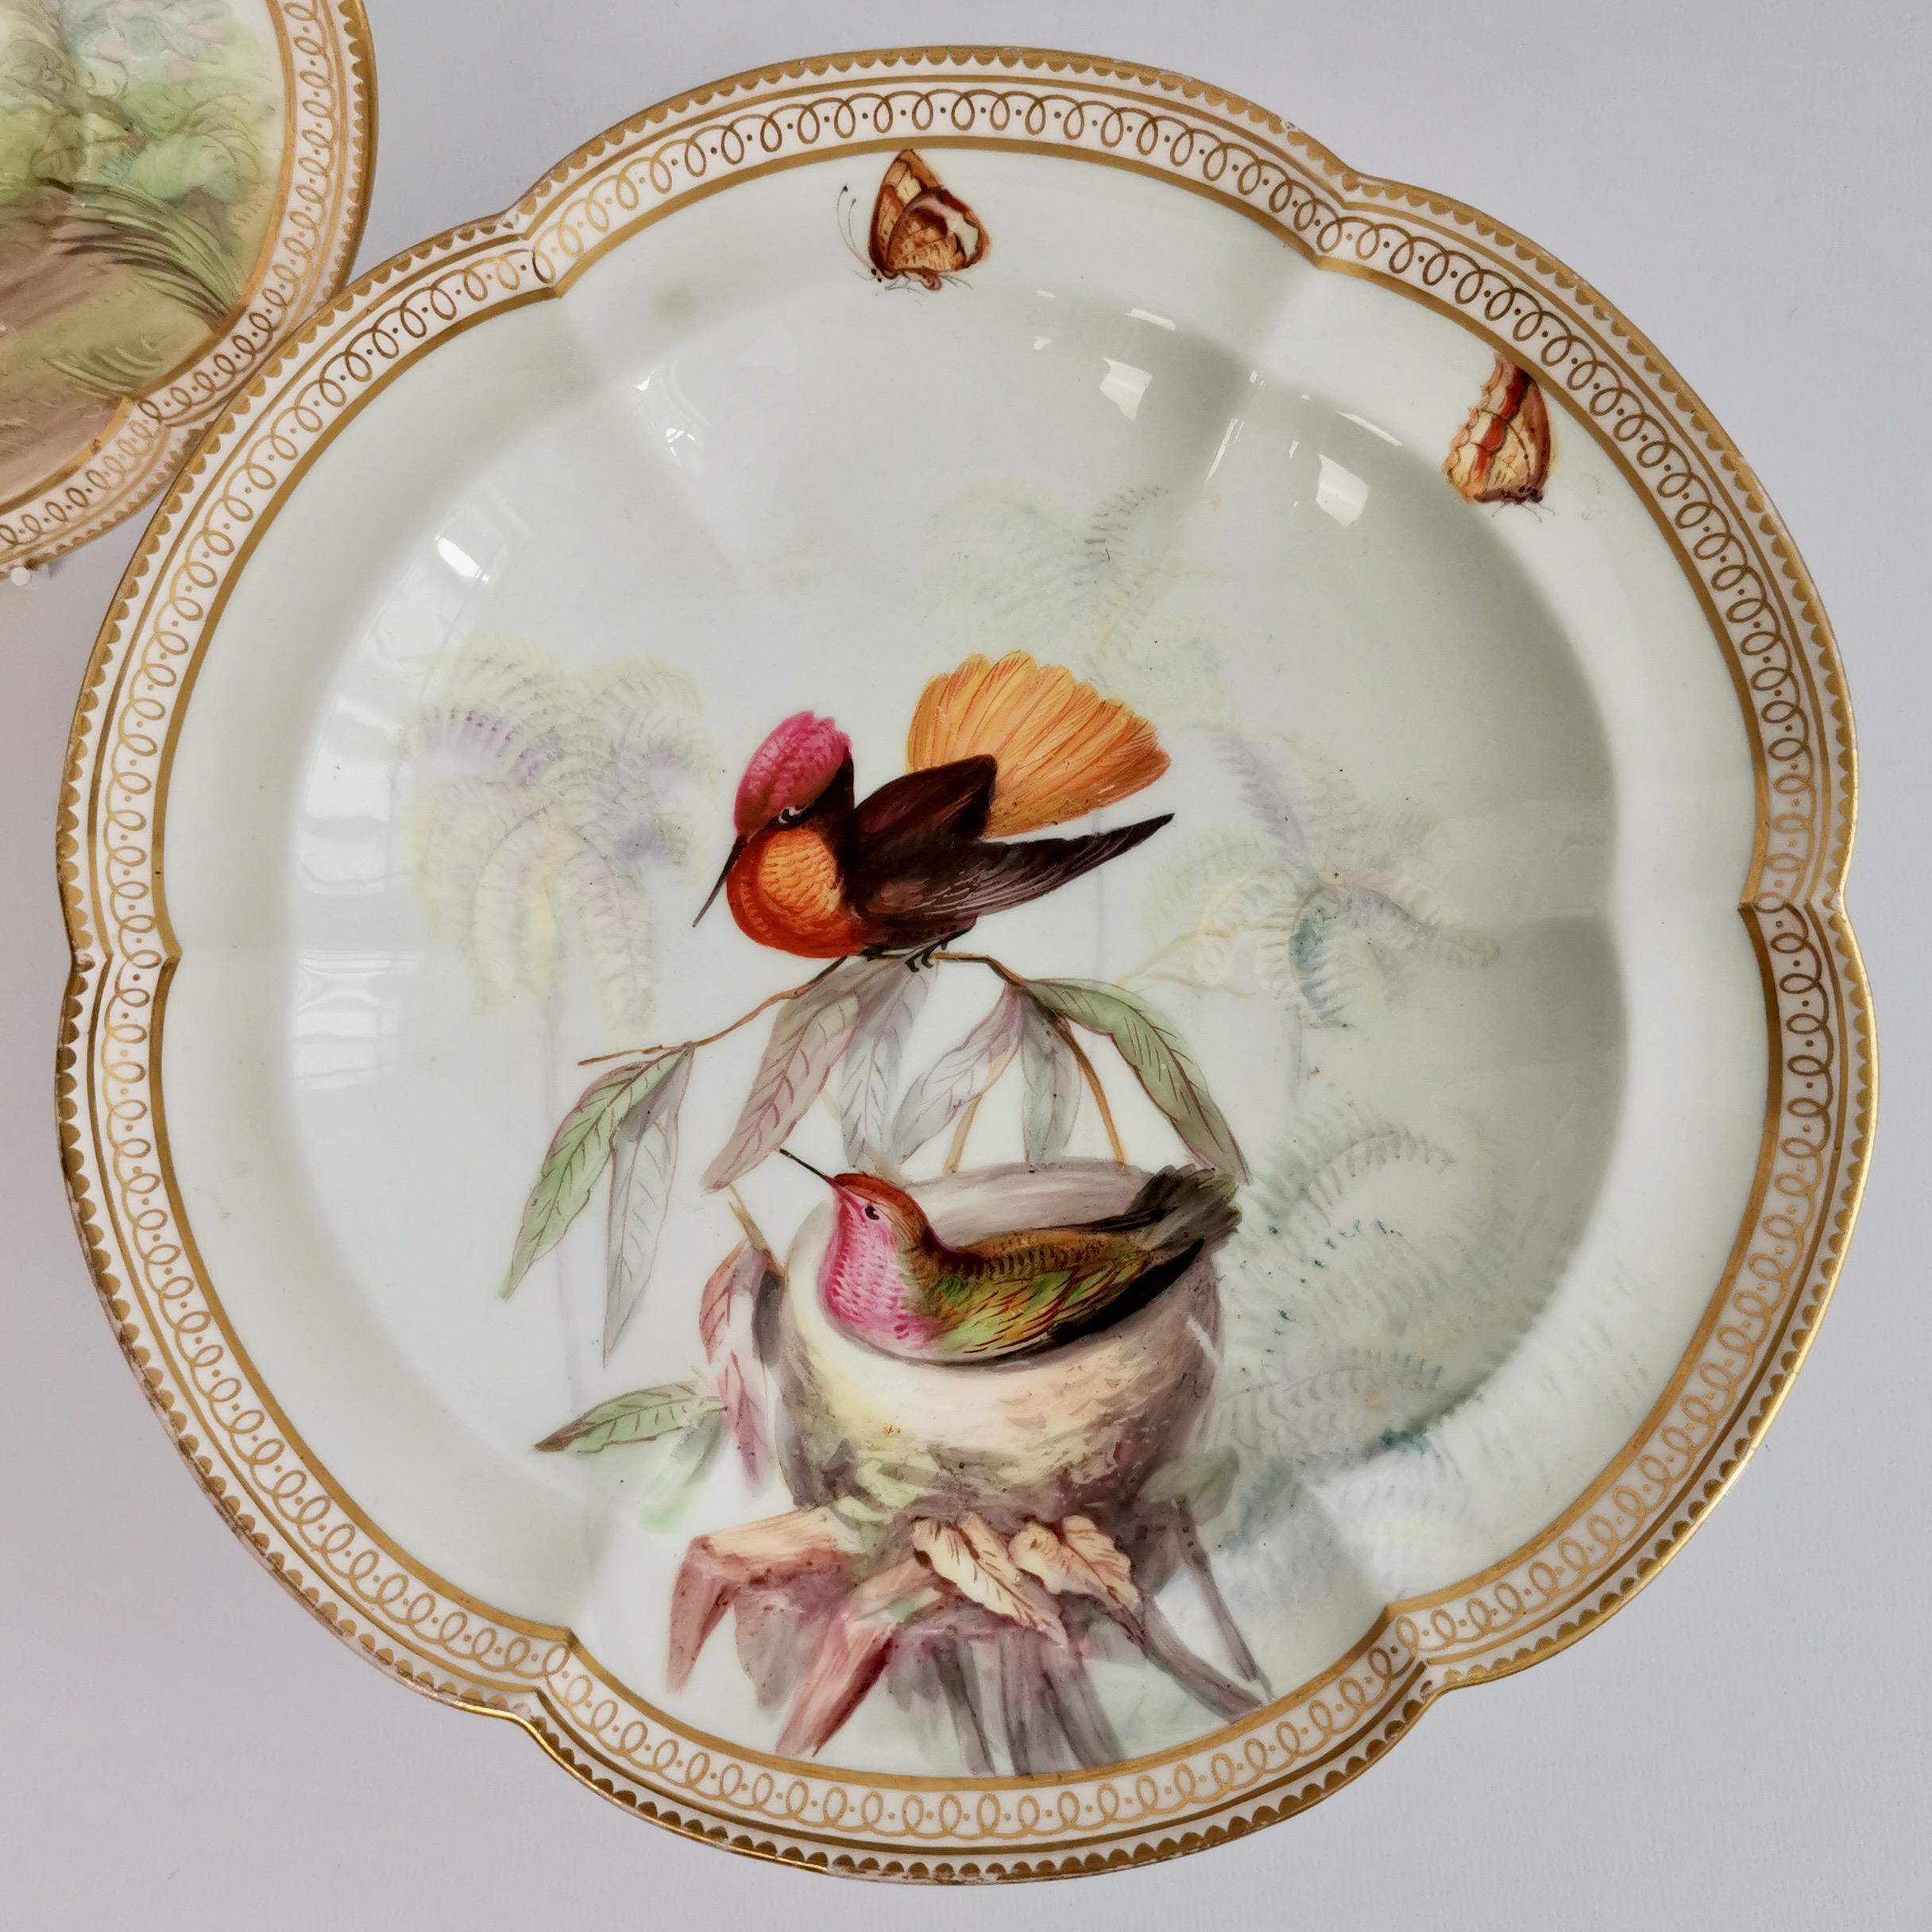 English Coalport Porcelain Comport and Plate, Birds by John Randall, Victorian 1865-1870